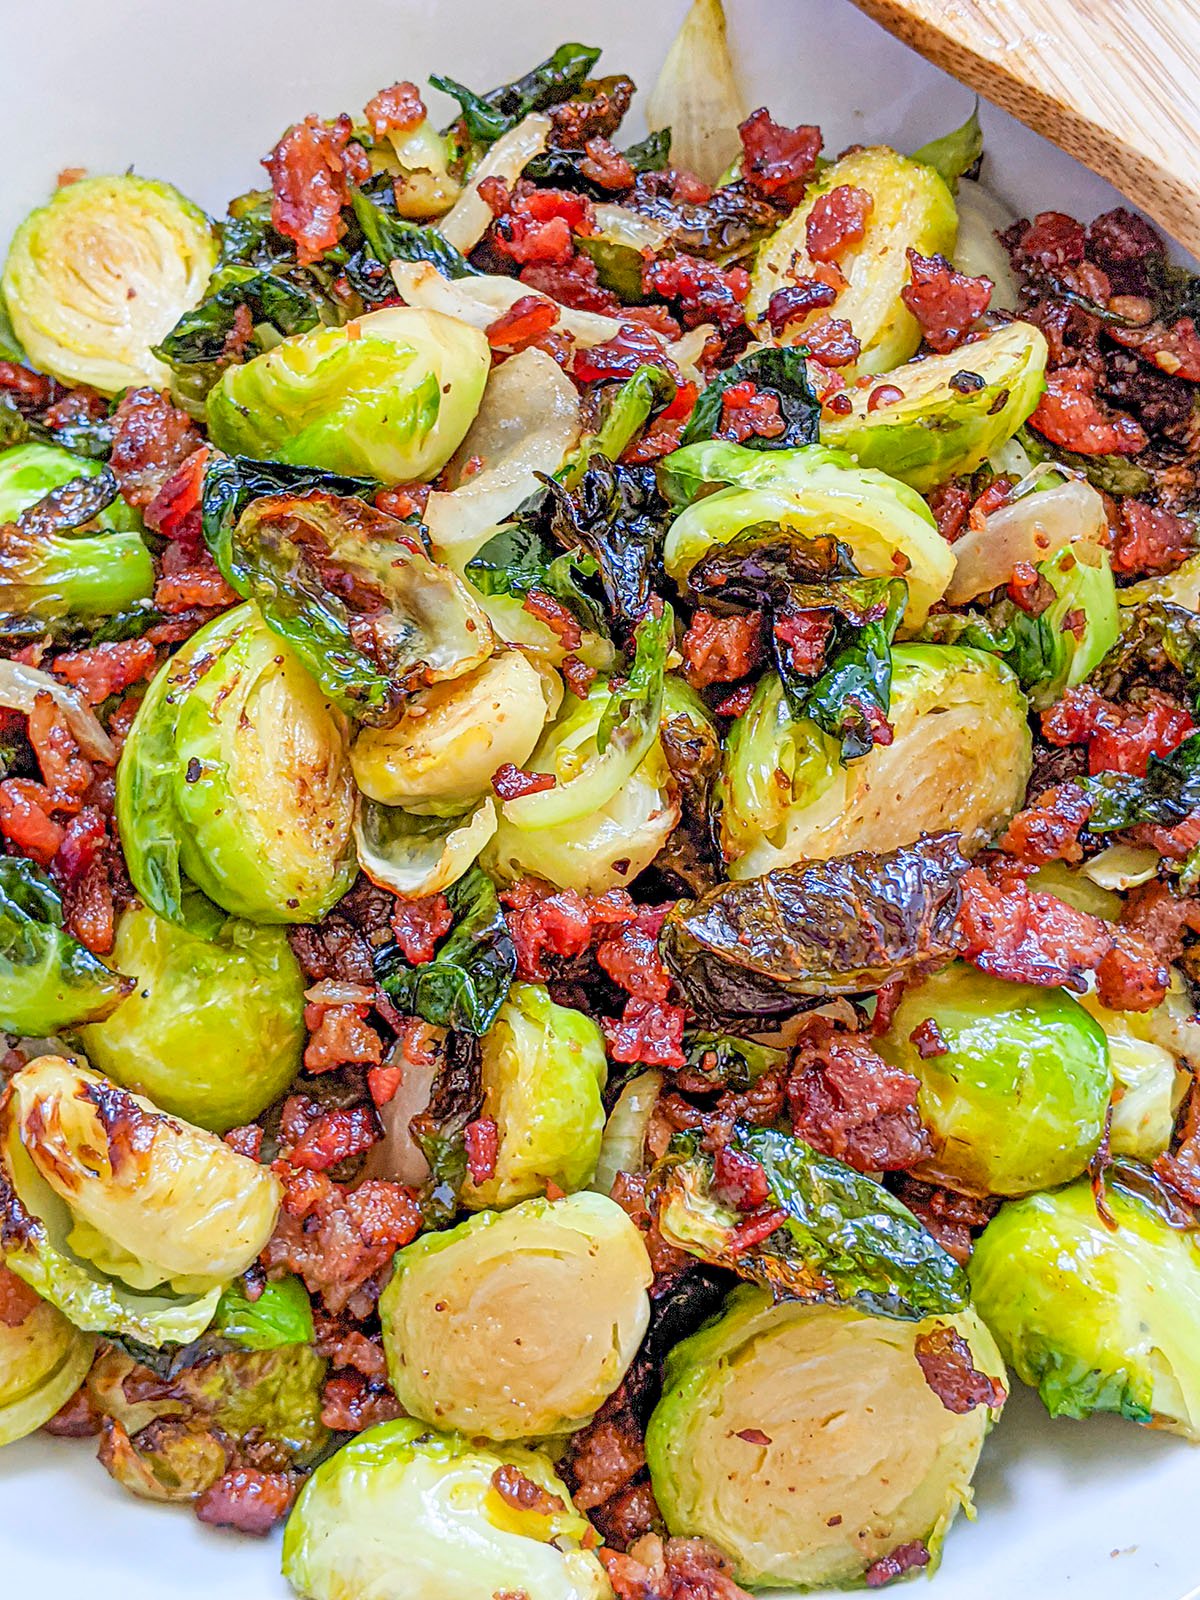 A close up photo of the brussel sprout side dish.